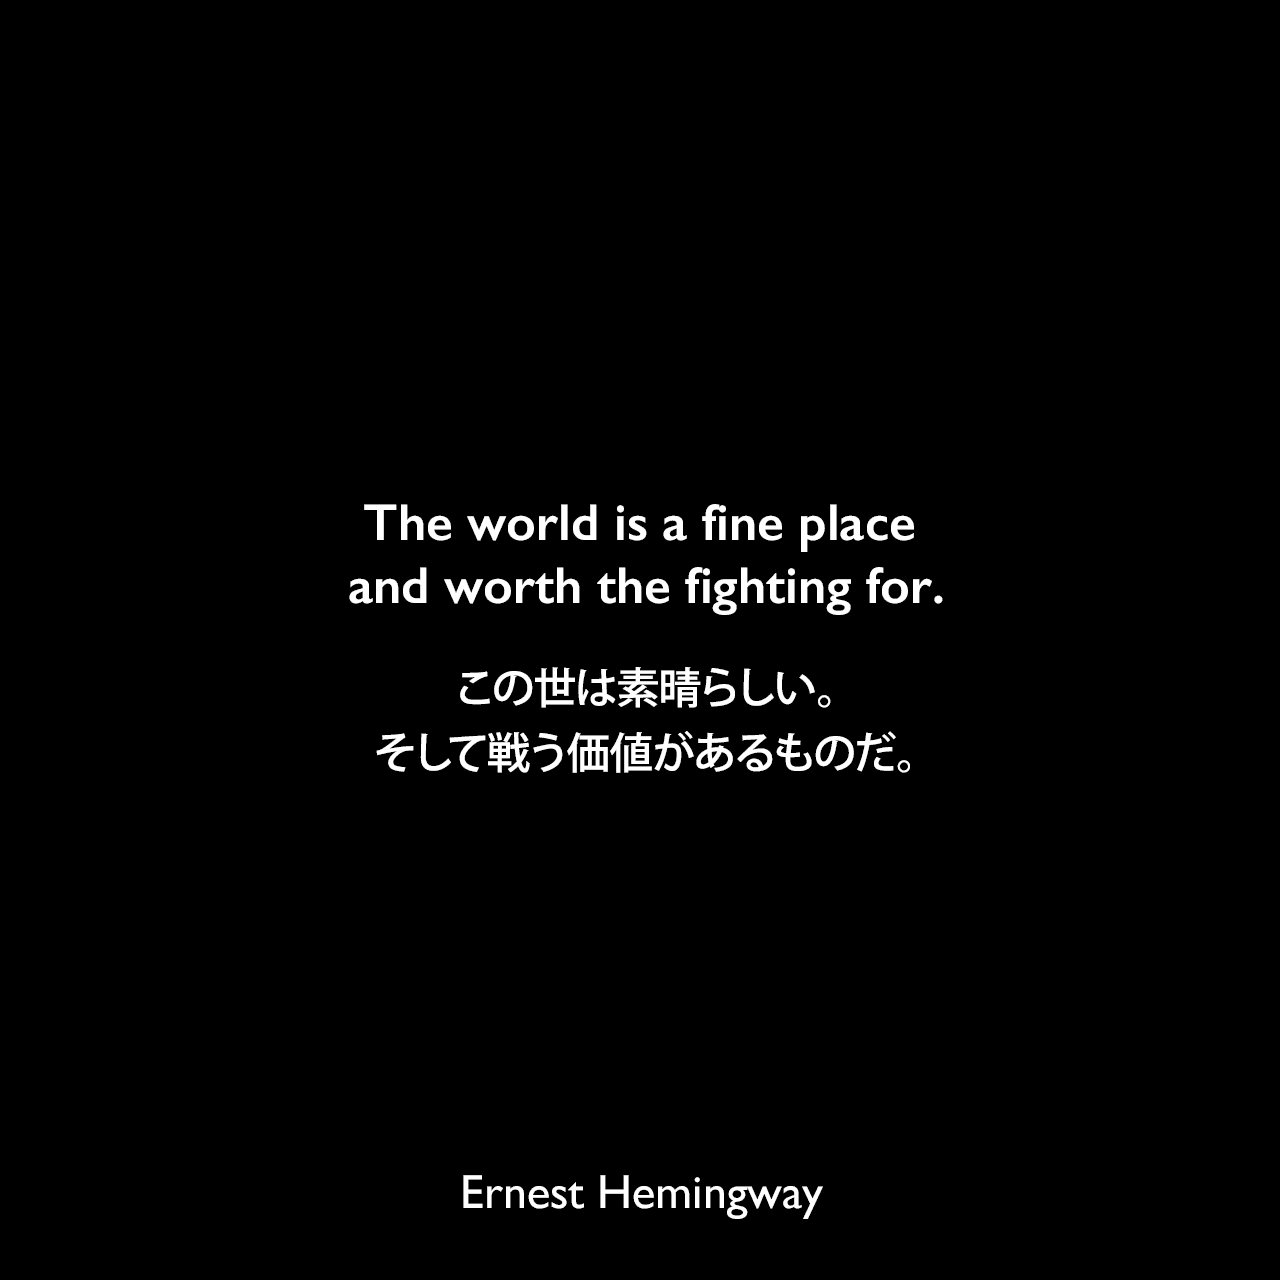 The world is a fine place and worth the fighting for.この世は素晴らしい。そして戦う価値があるものだ。（For Whom the Bell Tolls：誰がために鐘は鳴る）Ernest Hemingway